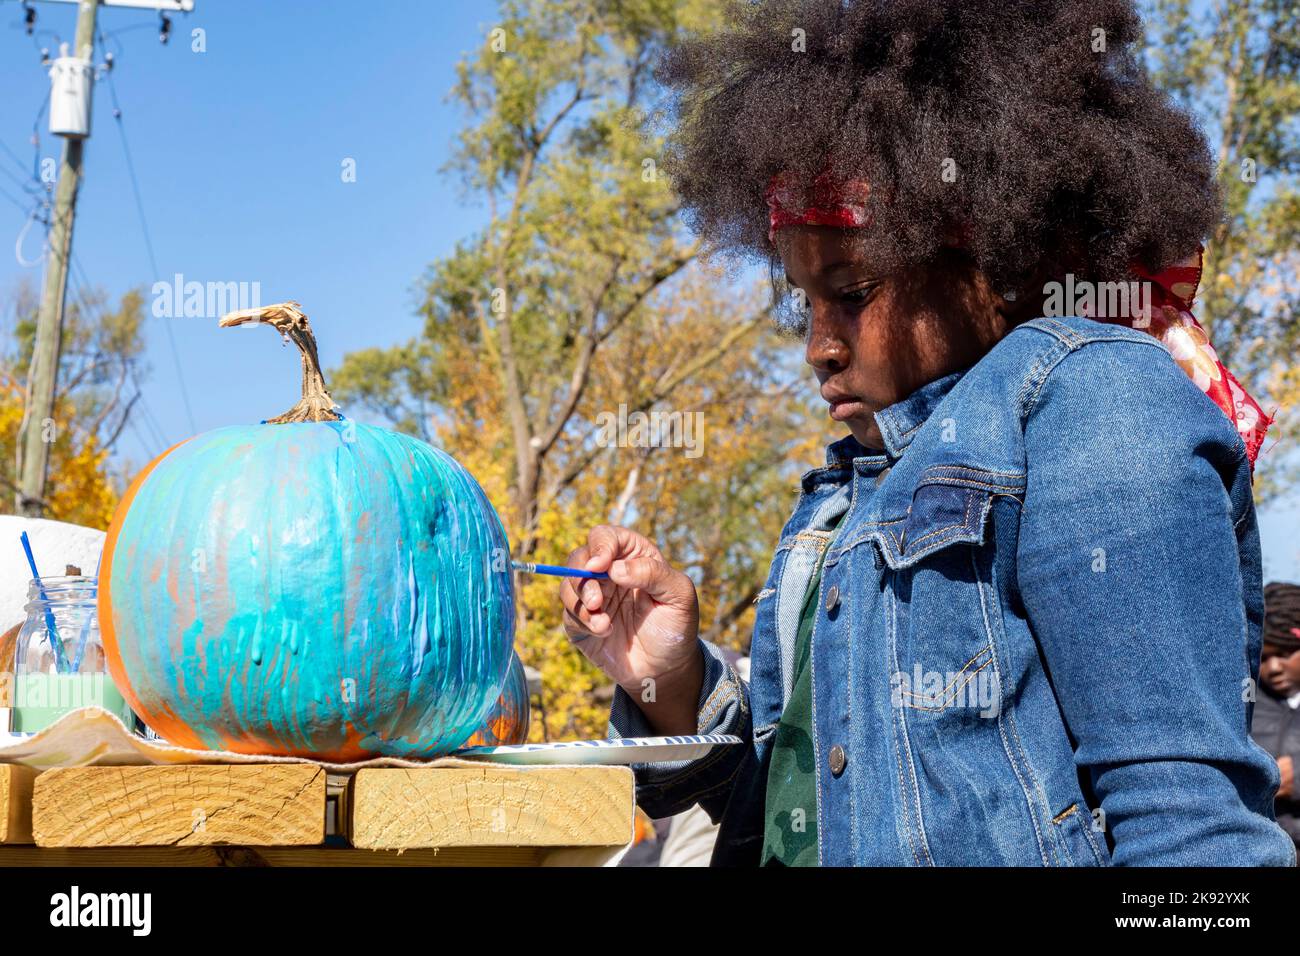 Detroit, Michigan - A girl paints a pumpking at a fall festival in Detroit's Morningside neighborhood. The event was organized by the Motor City Groun Stock Photo